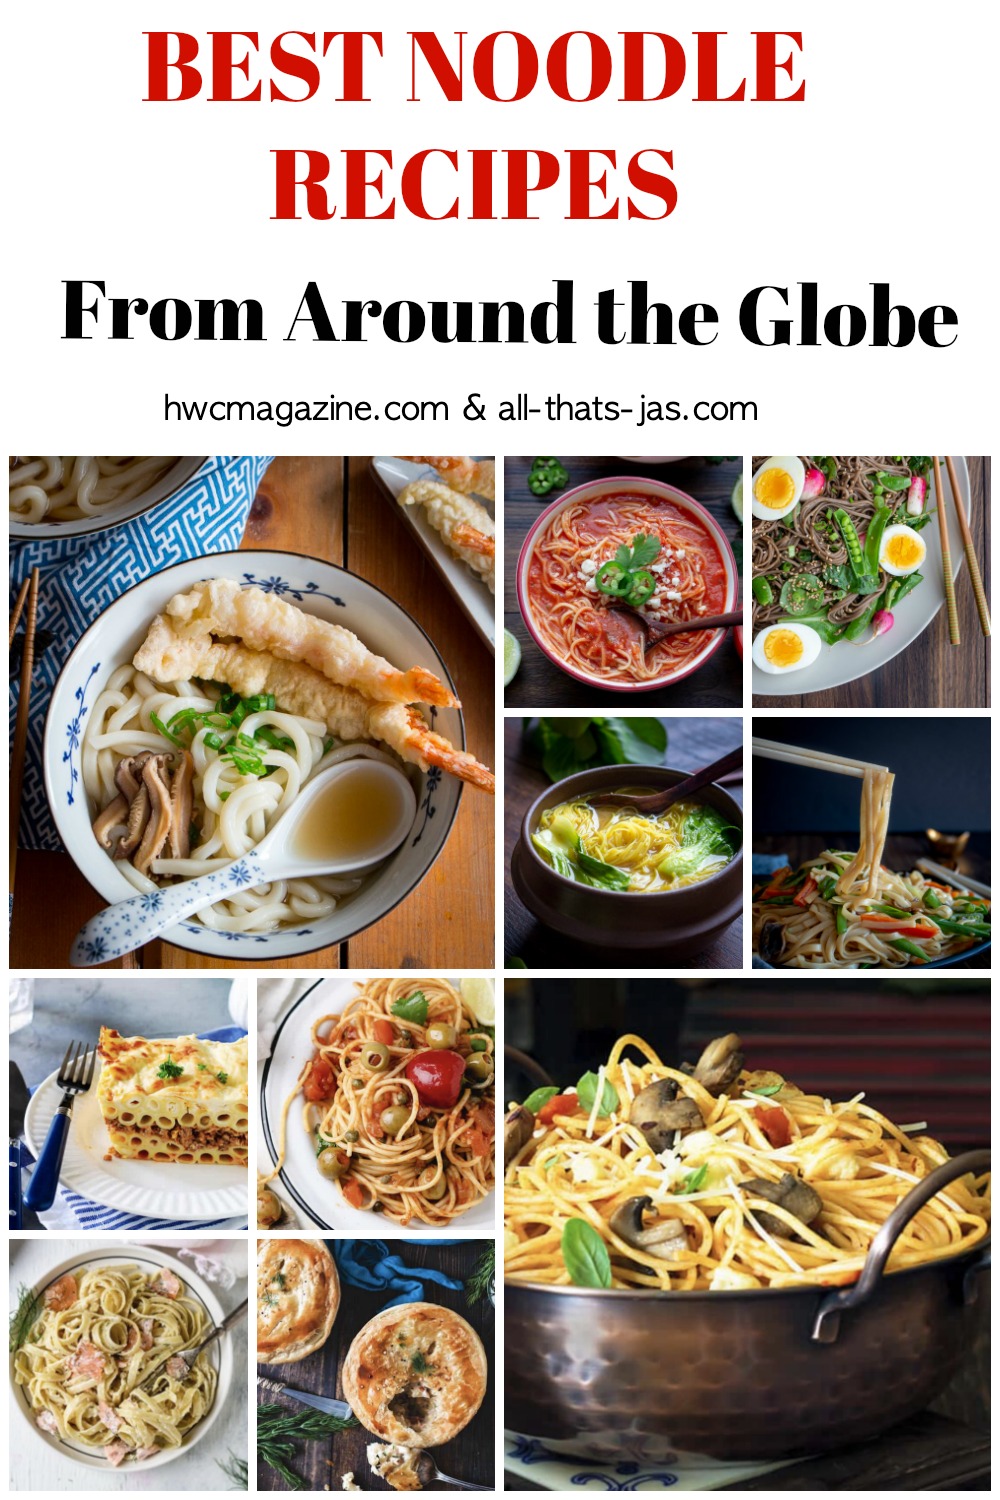 Best Noodle Recipes from around the Globe/ https://www.hwcmagazine.com